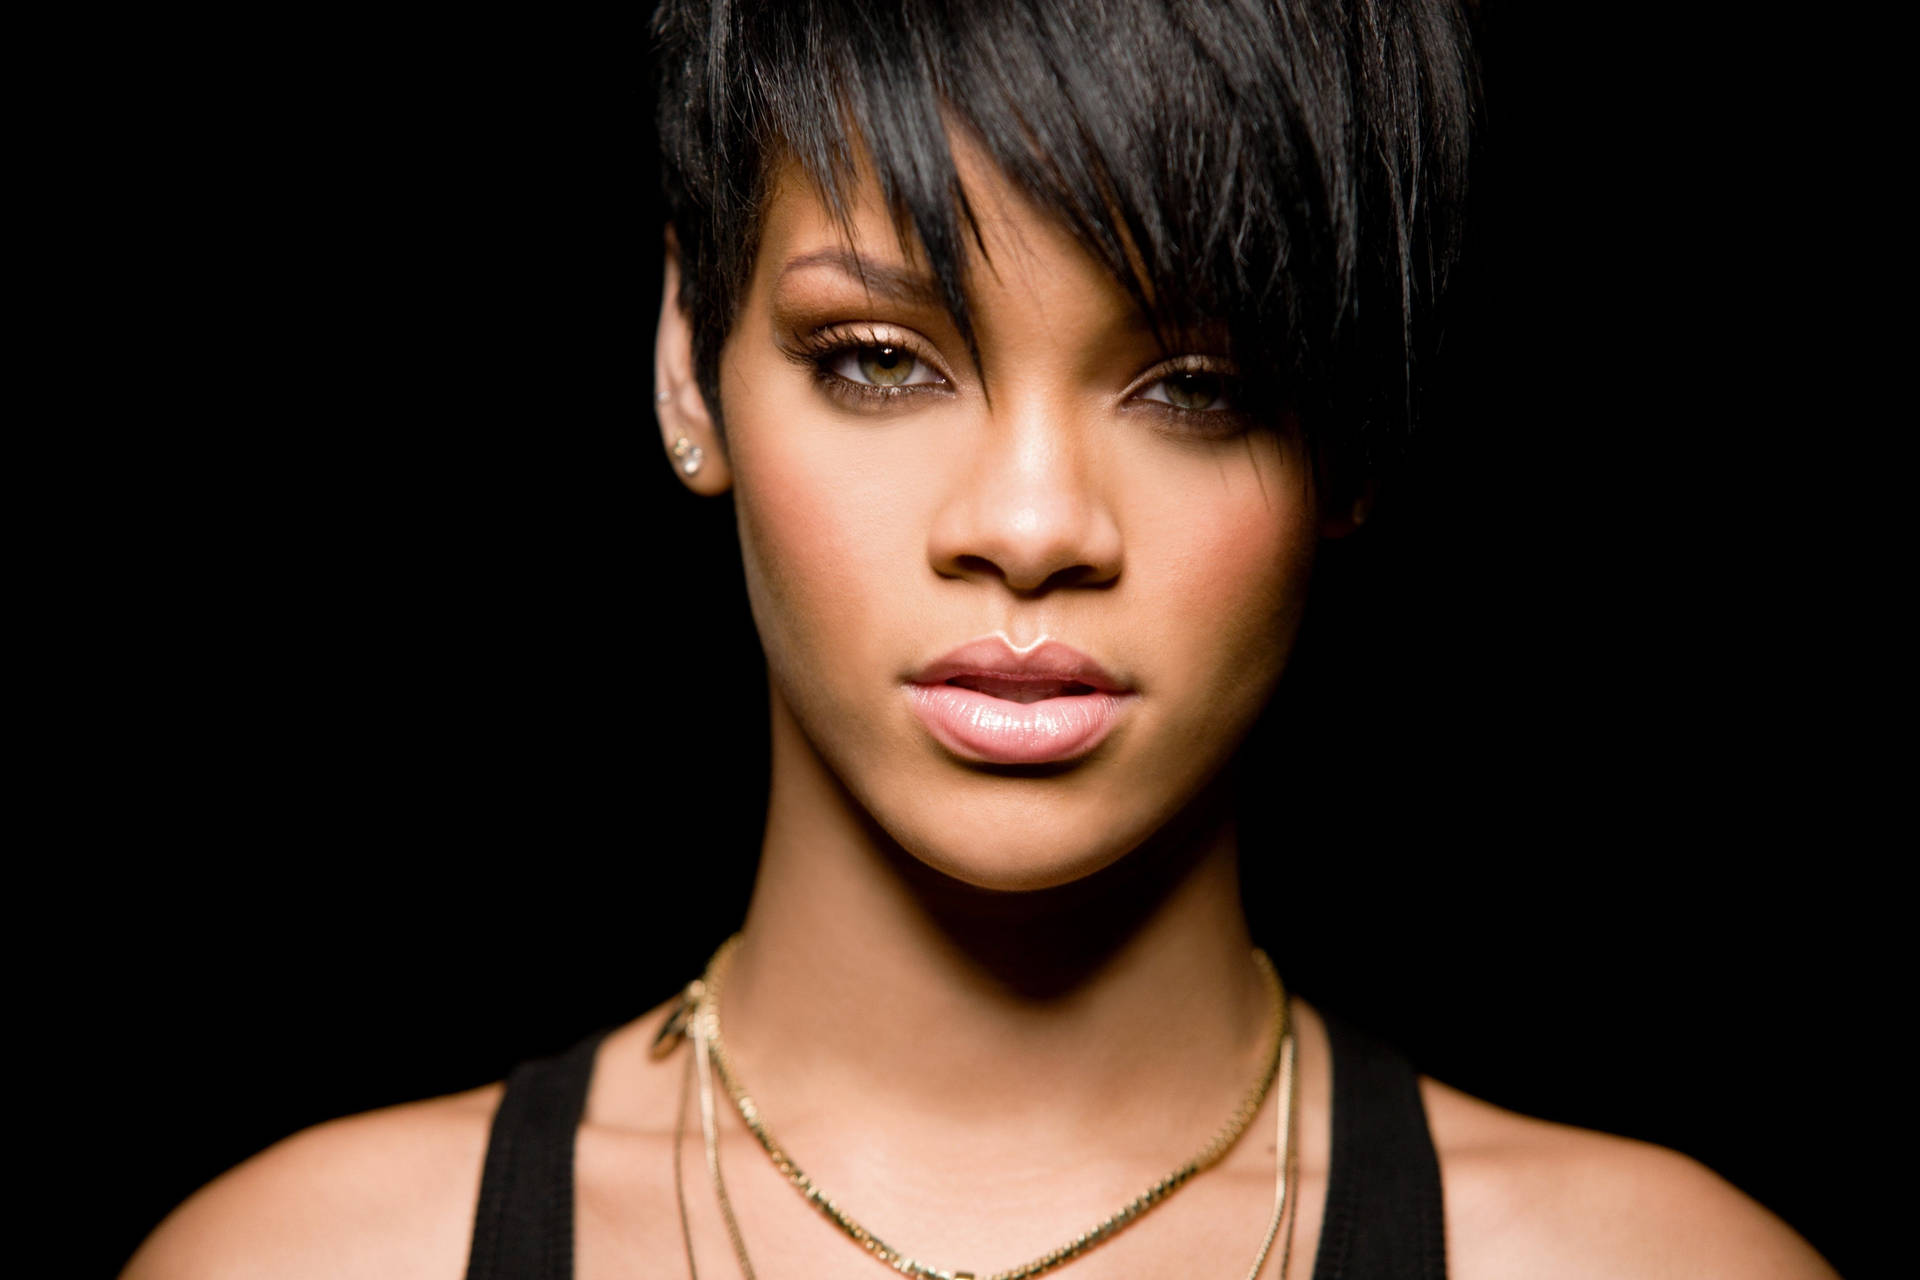 5616X3744 Rihanna Wallpaper and Background